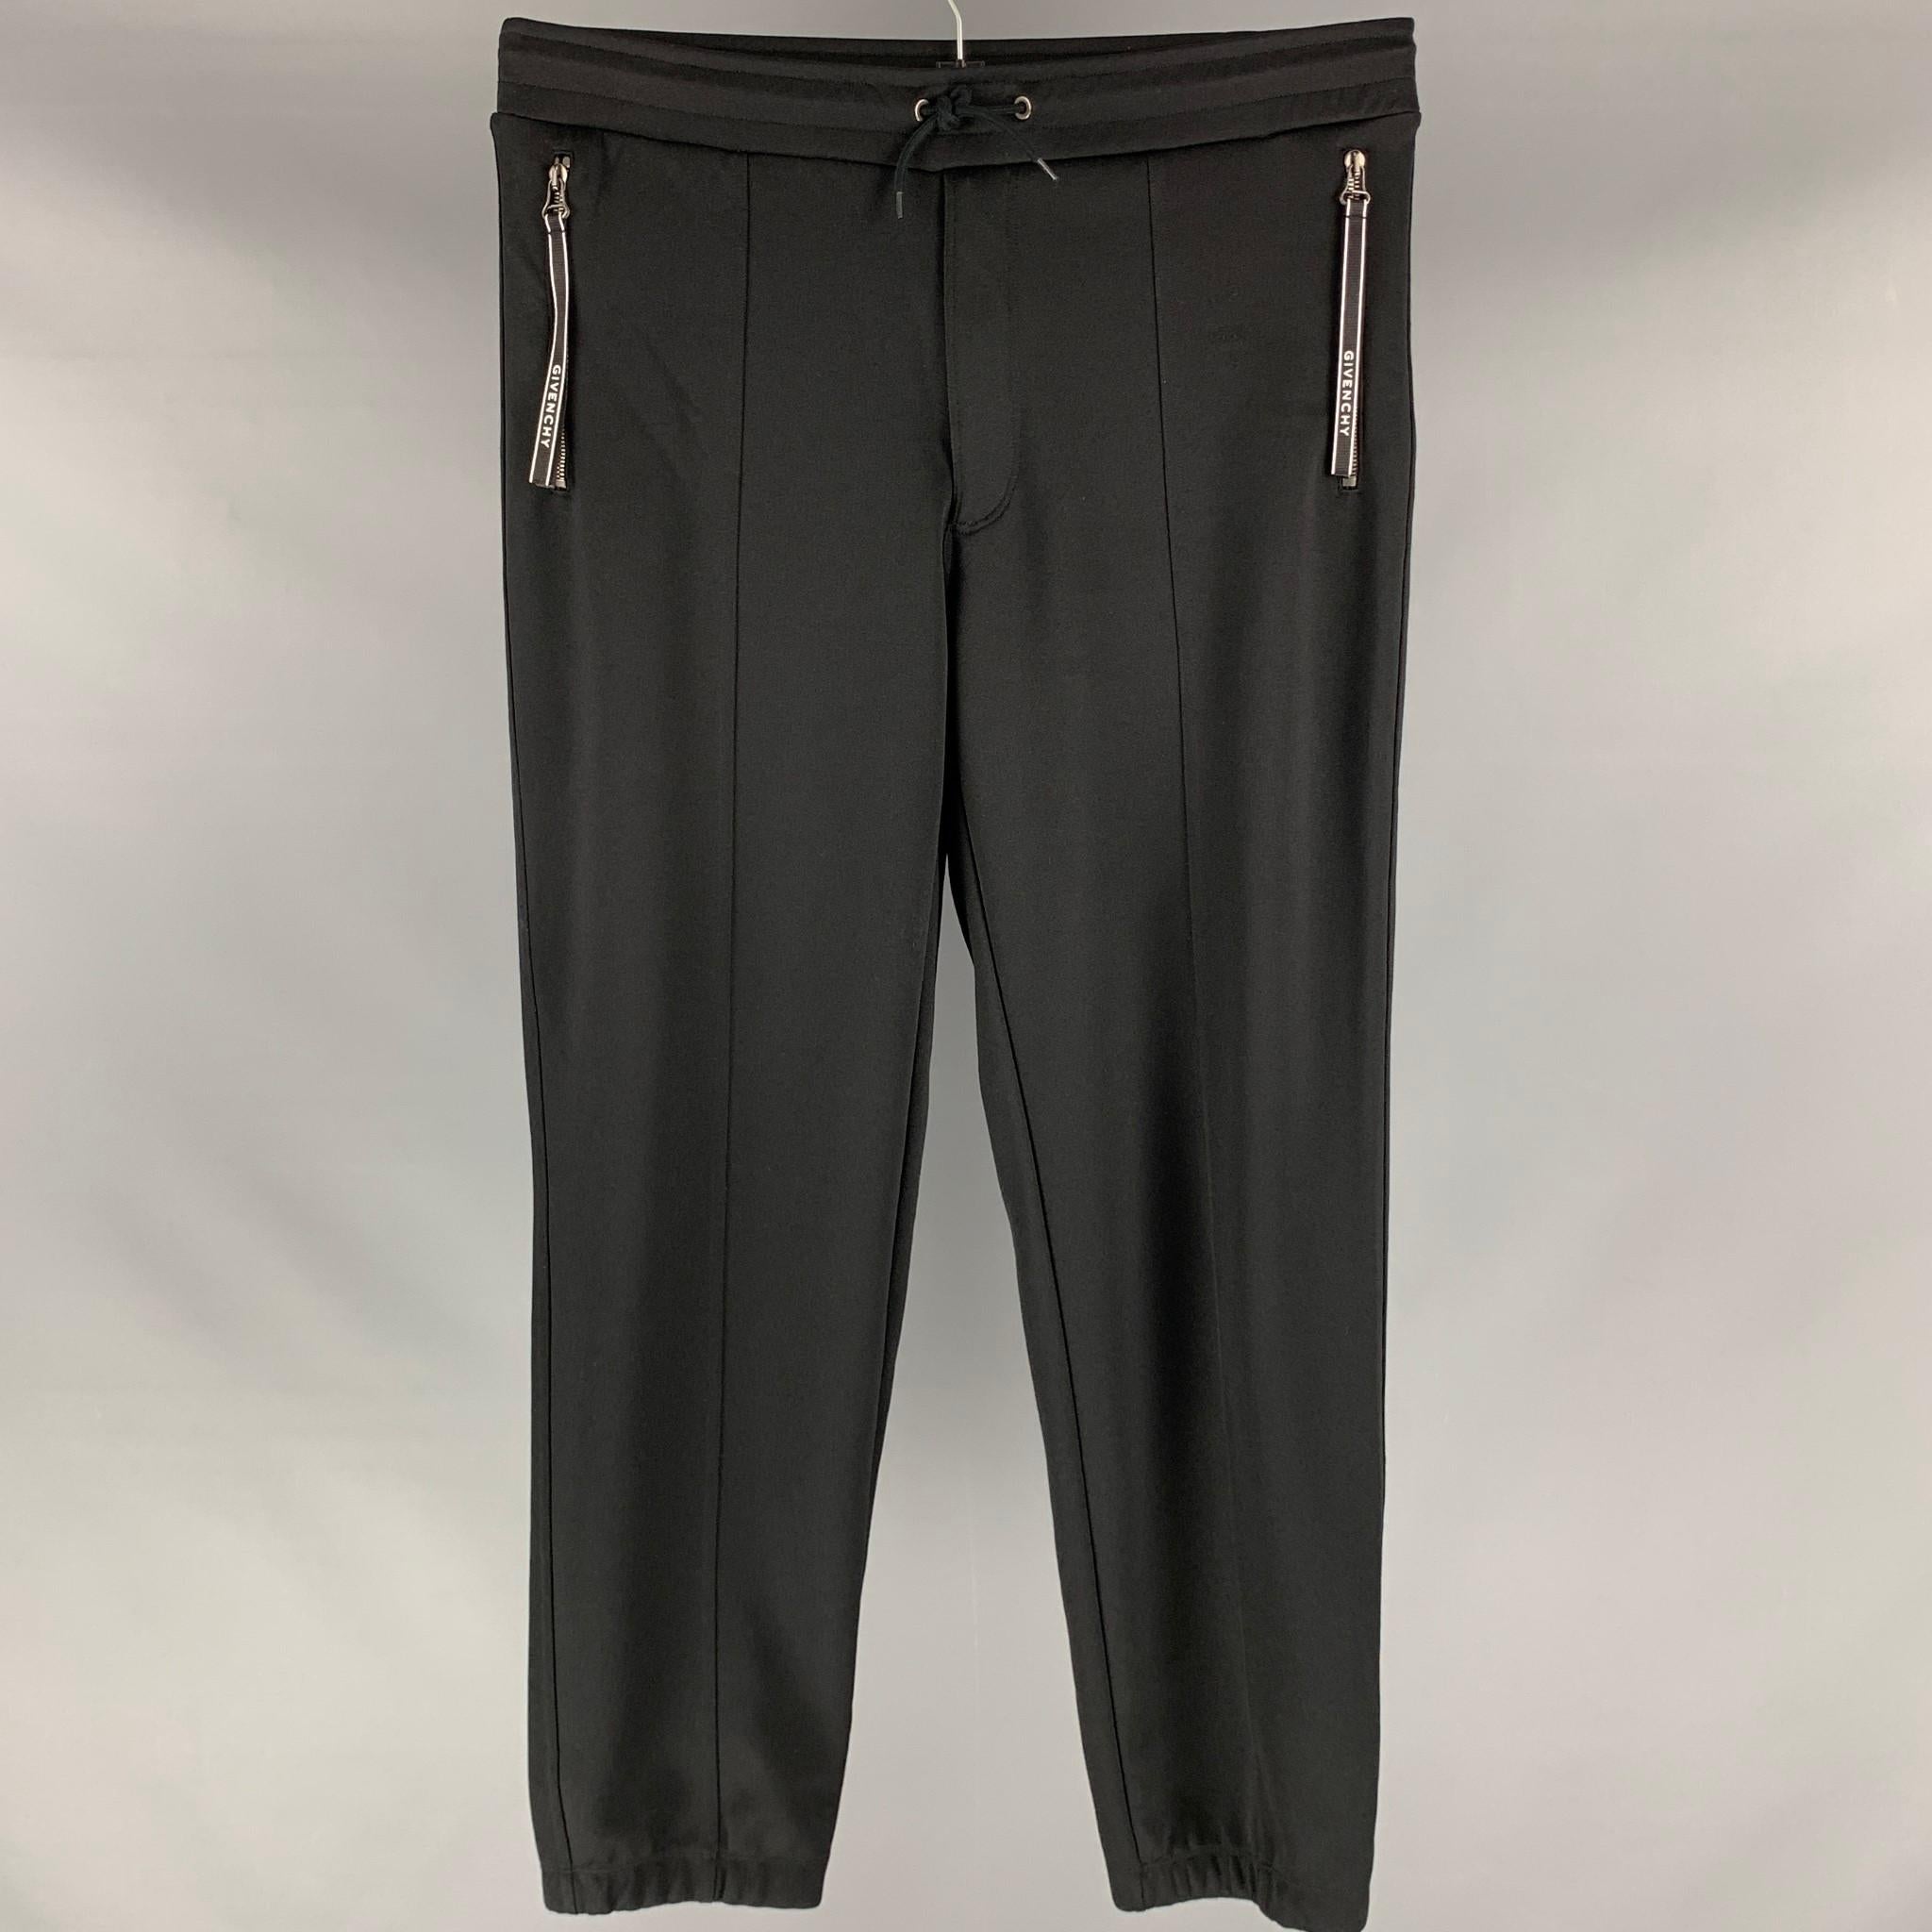 GIVENCHY sweatpants comes in a black cotton polyester jersey knit fabric featuring a logo trim detail, zip up pockets, elastic waist, and a drawstring.

Excellent Pre-Owned Condition.
Marked: L

Measurements:

Waist: 33 in.
Rise: 13 in.
Inseam: 30